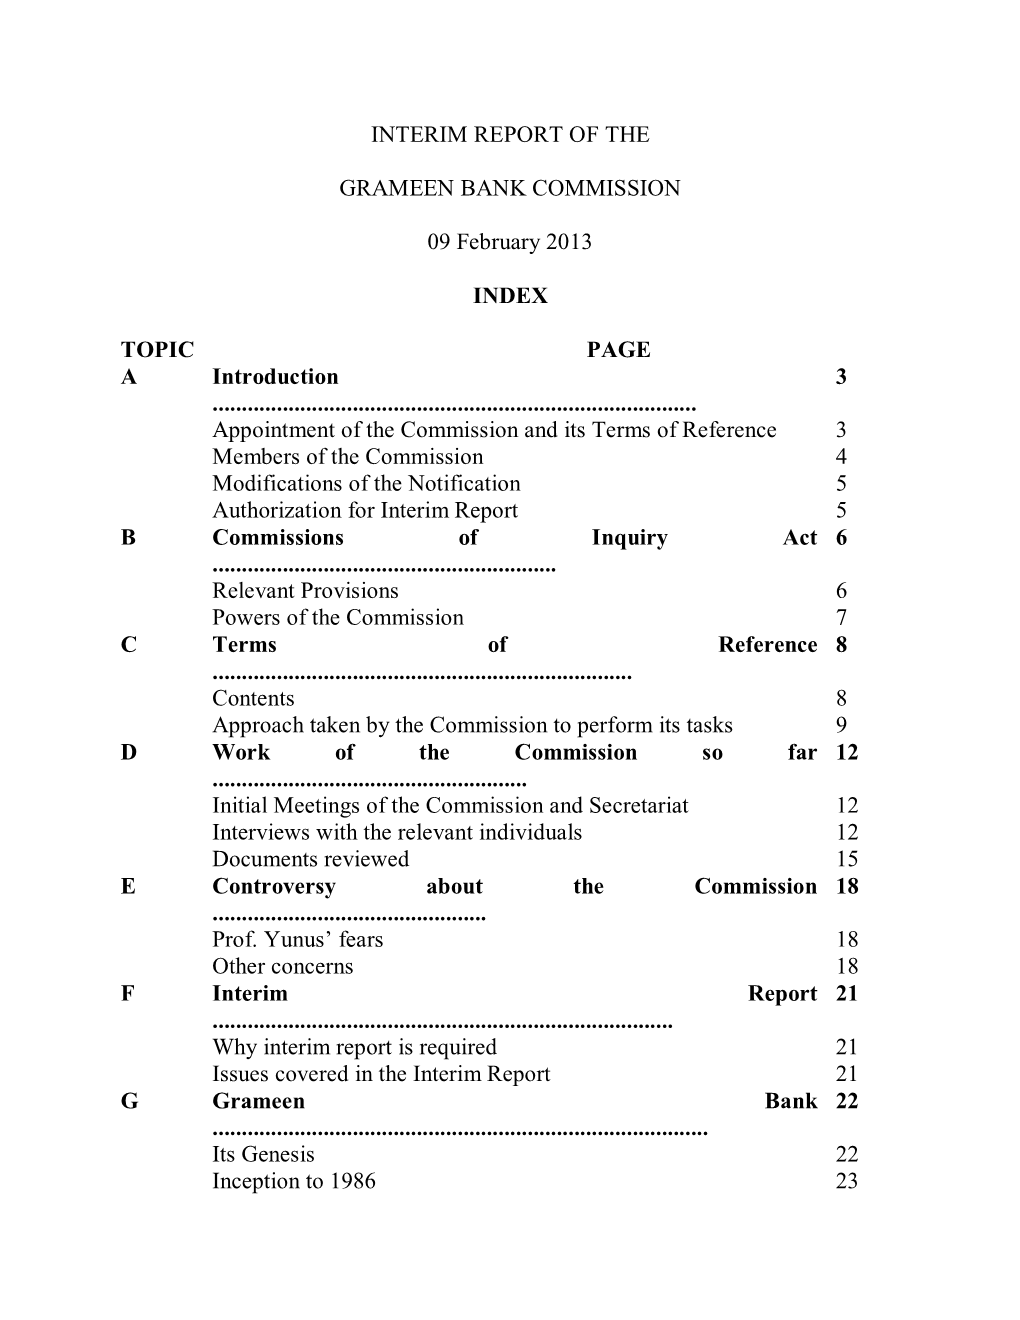 Interim Report of the Grameen Bank Commission 09